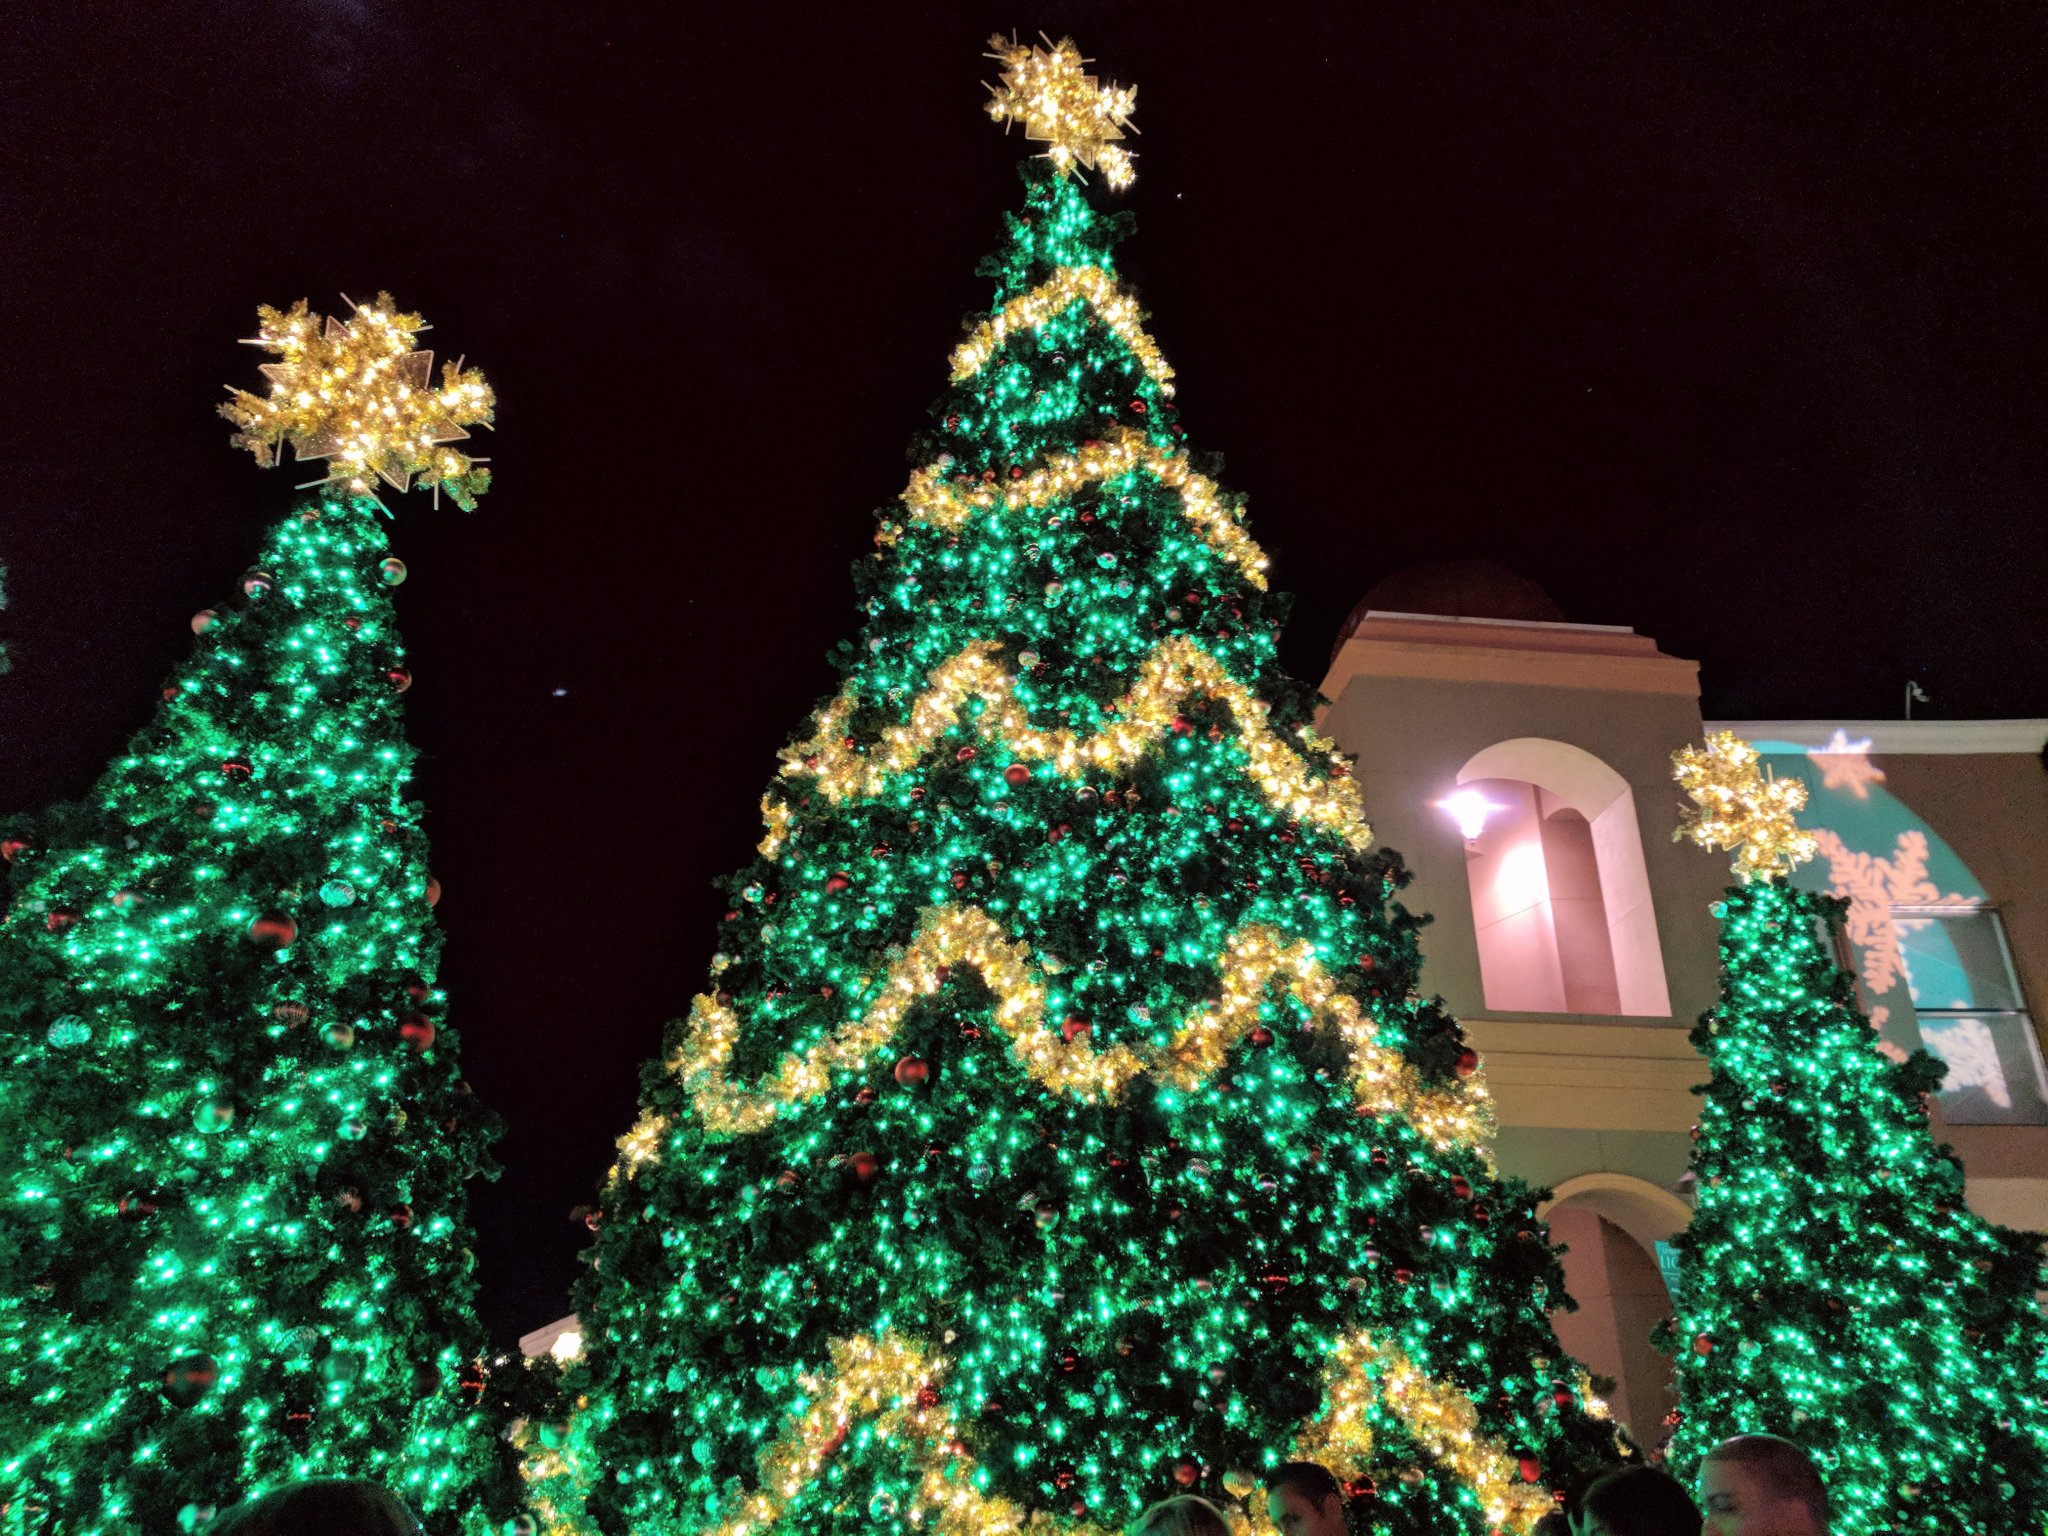 Symphony in Lights at The Shops at Wiregrass Florida's Sports Coast